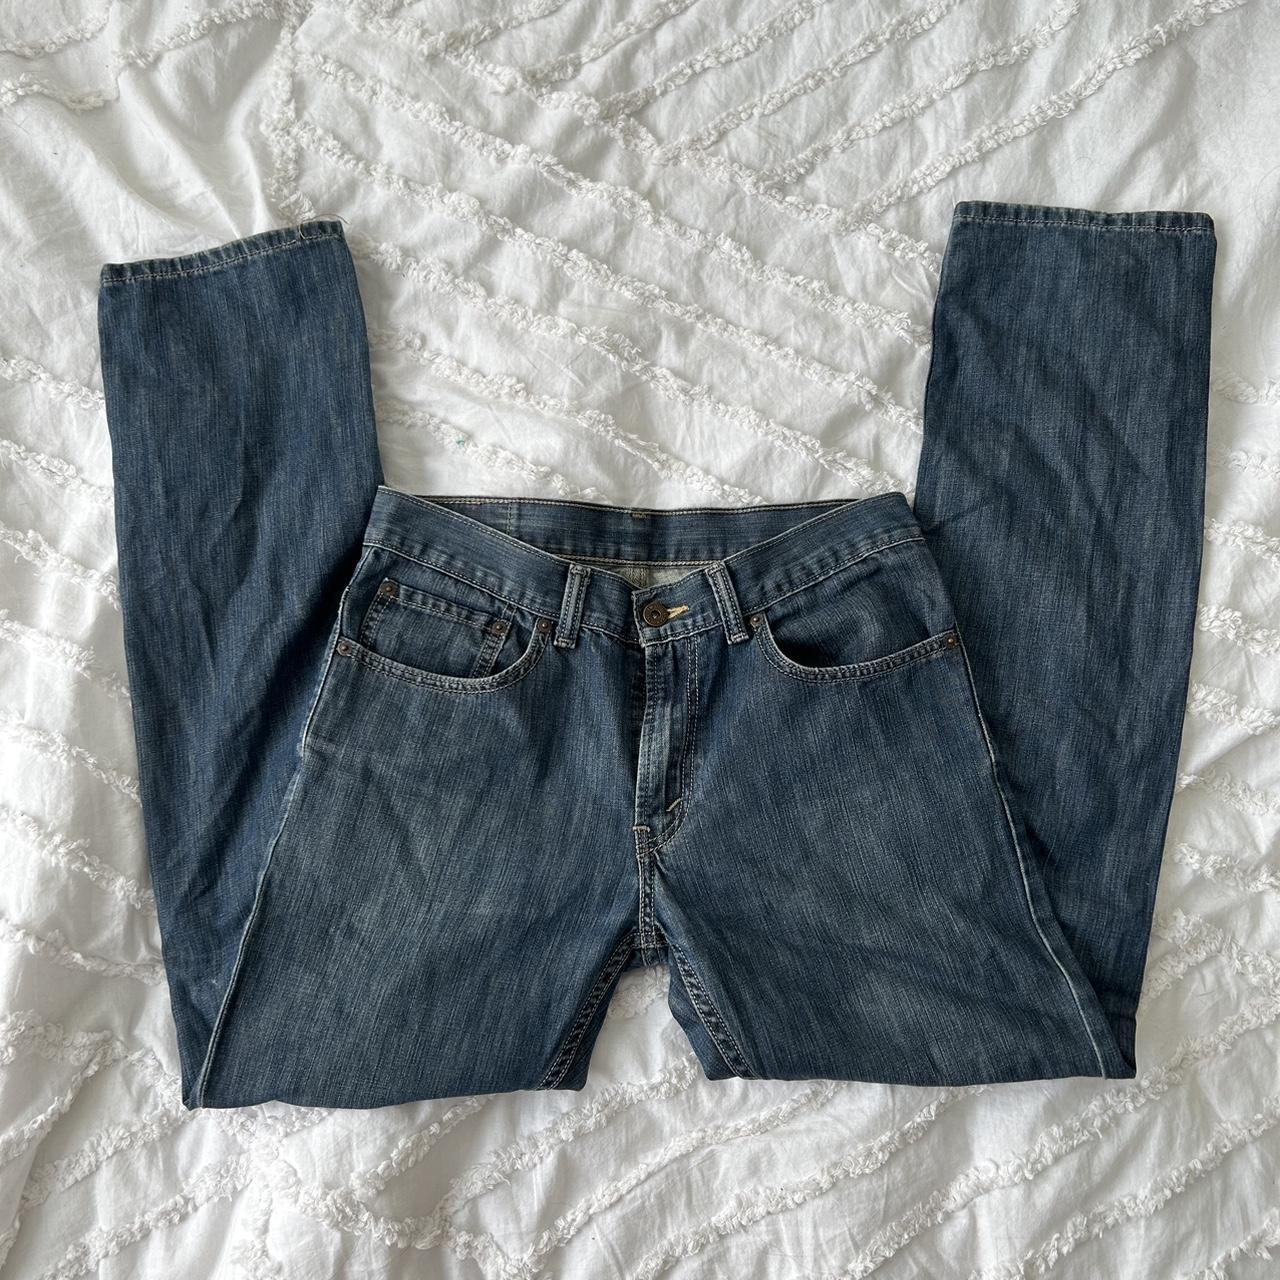 vintage levi’s jeans size: sizes had faded but style... - Depop